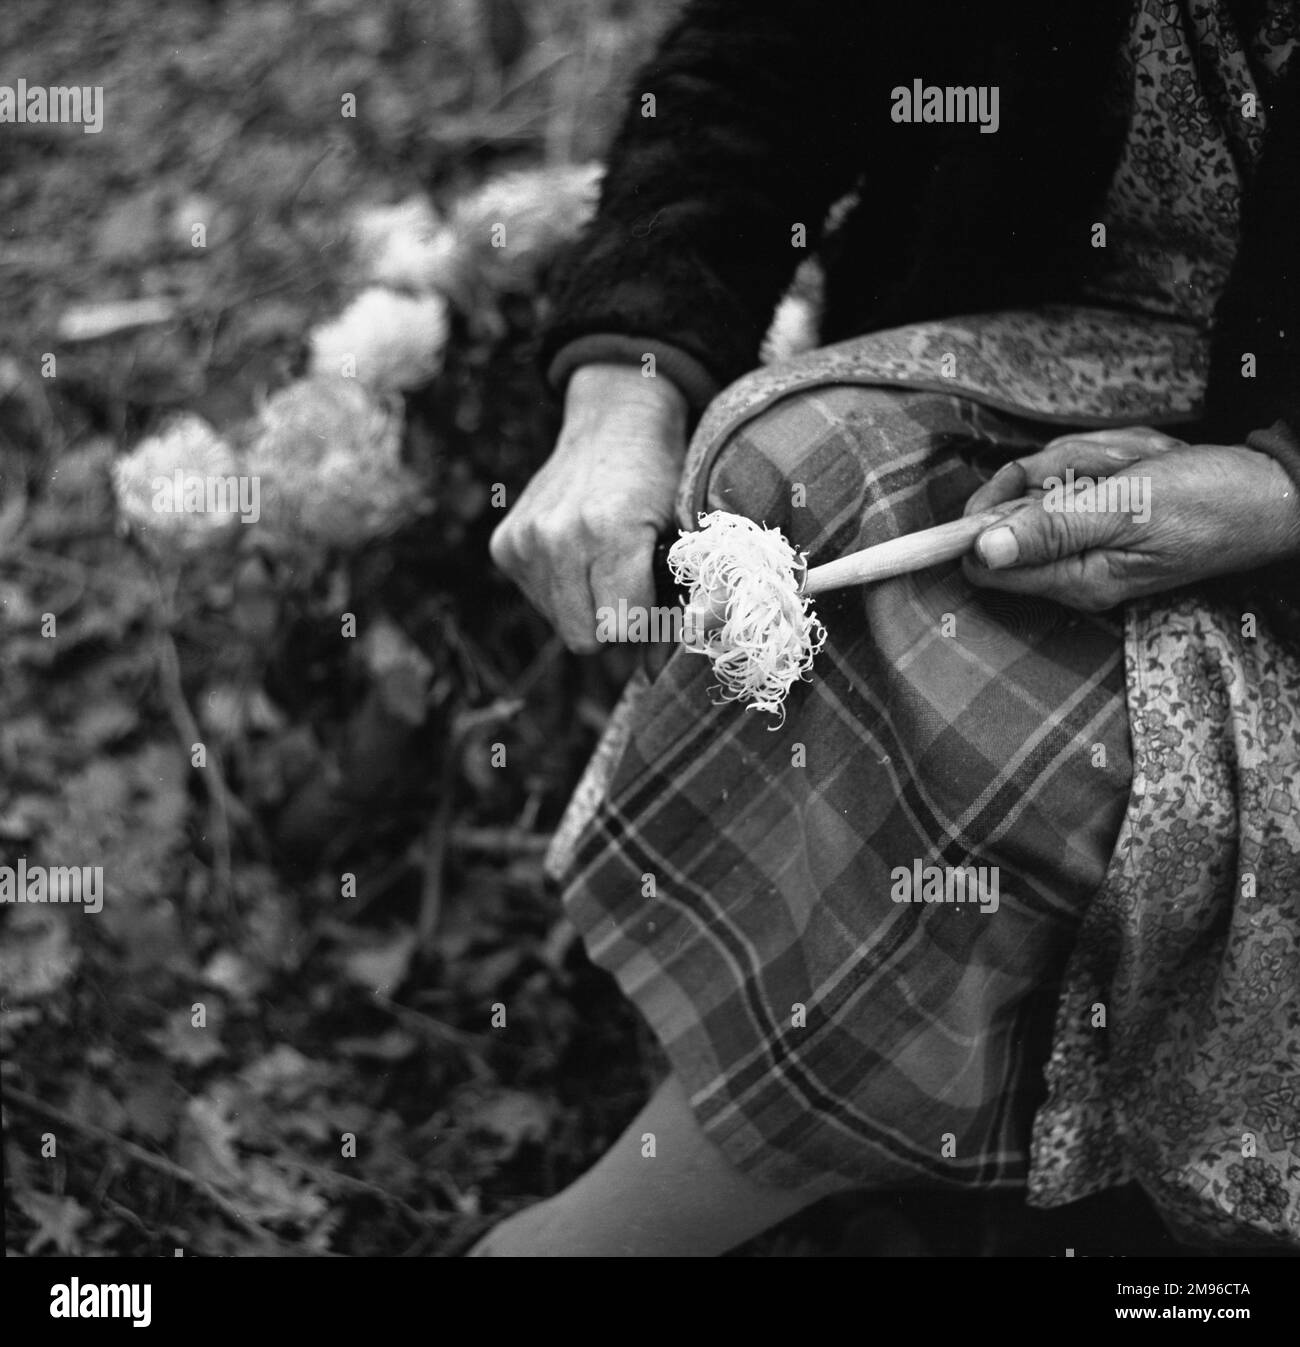 A close-up of a gipsy woman sitting in the open air with a washing up brush in her hand. Stock Photo